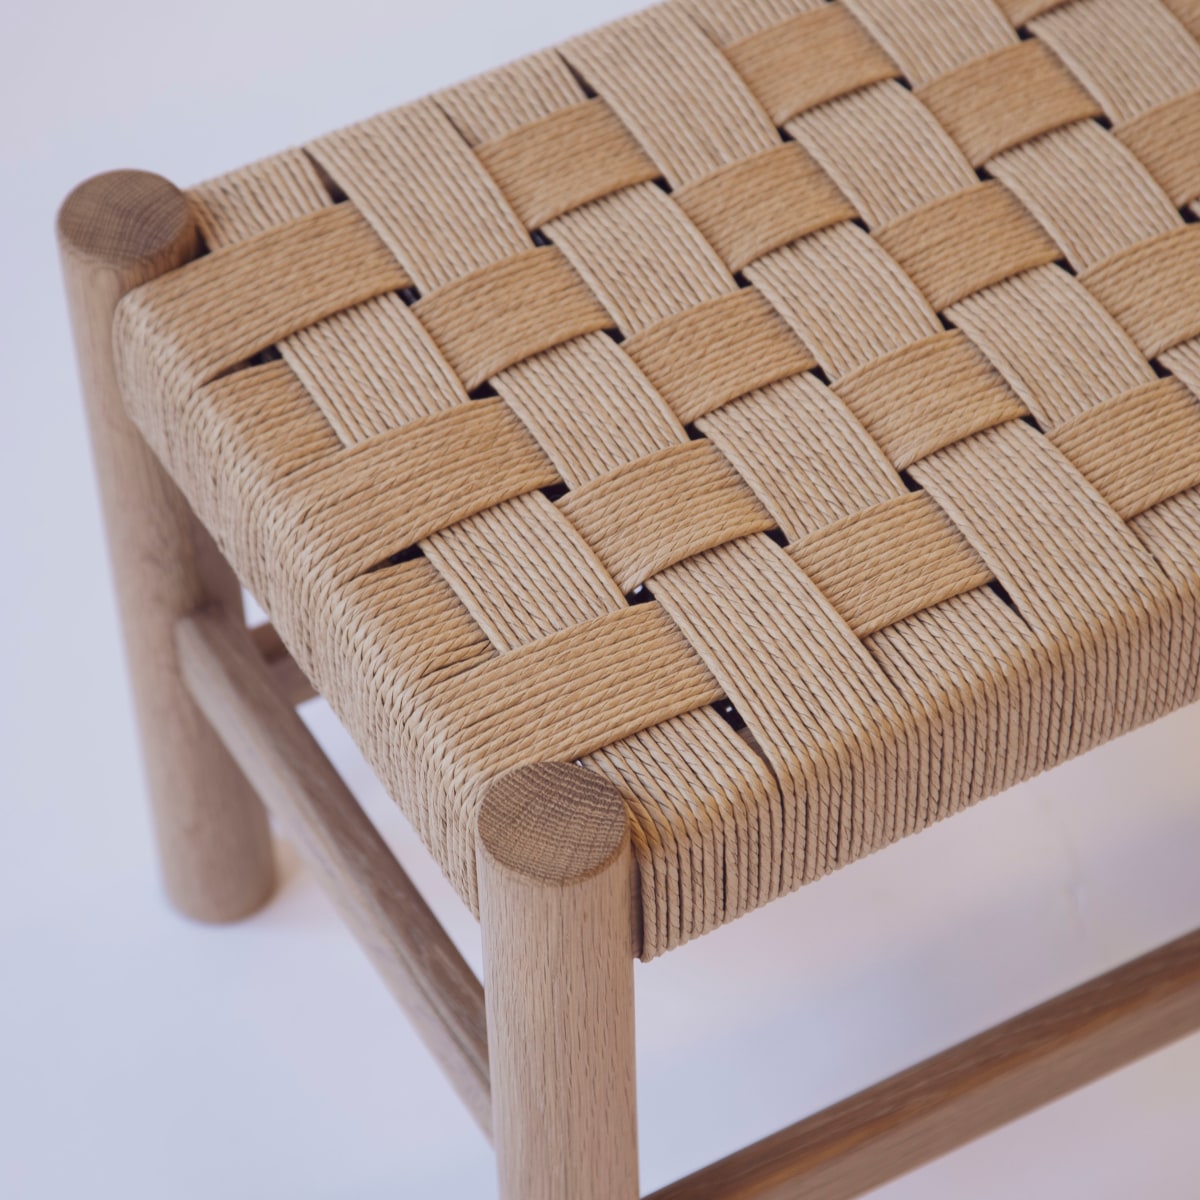 How to Create a Danish-Cord Seating Surface - Core77